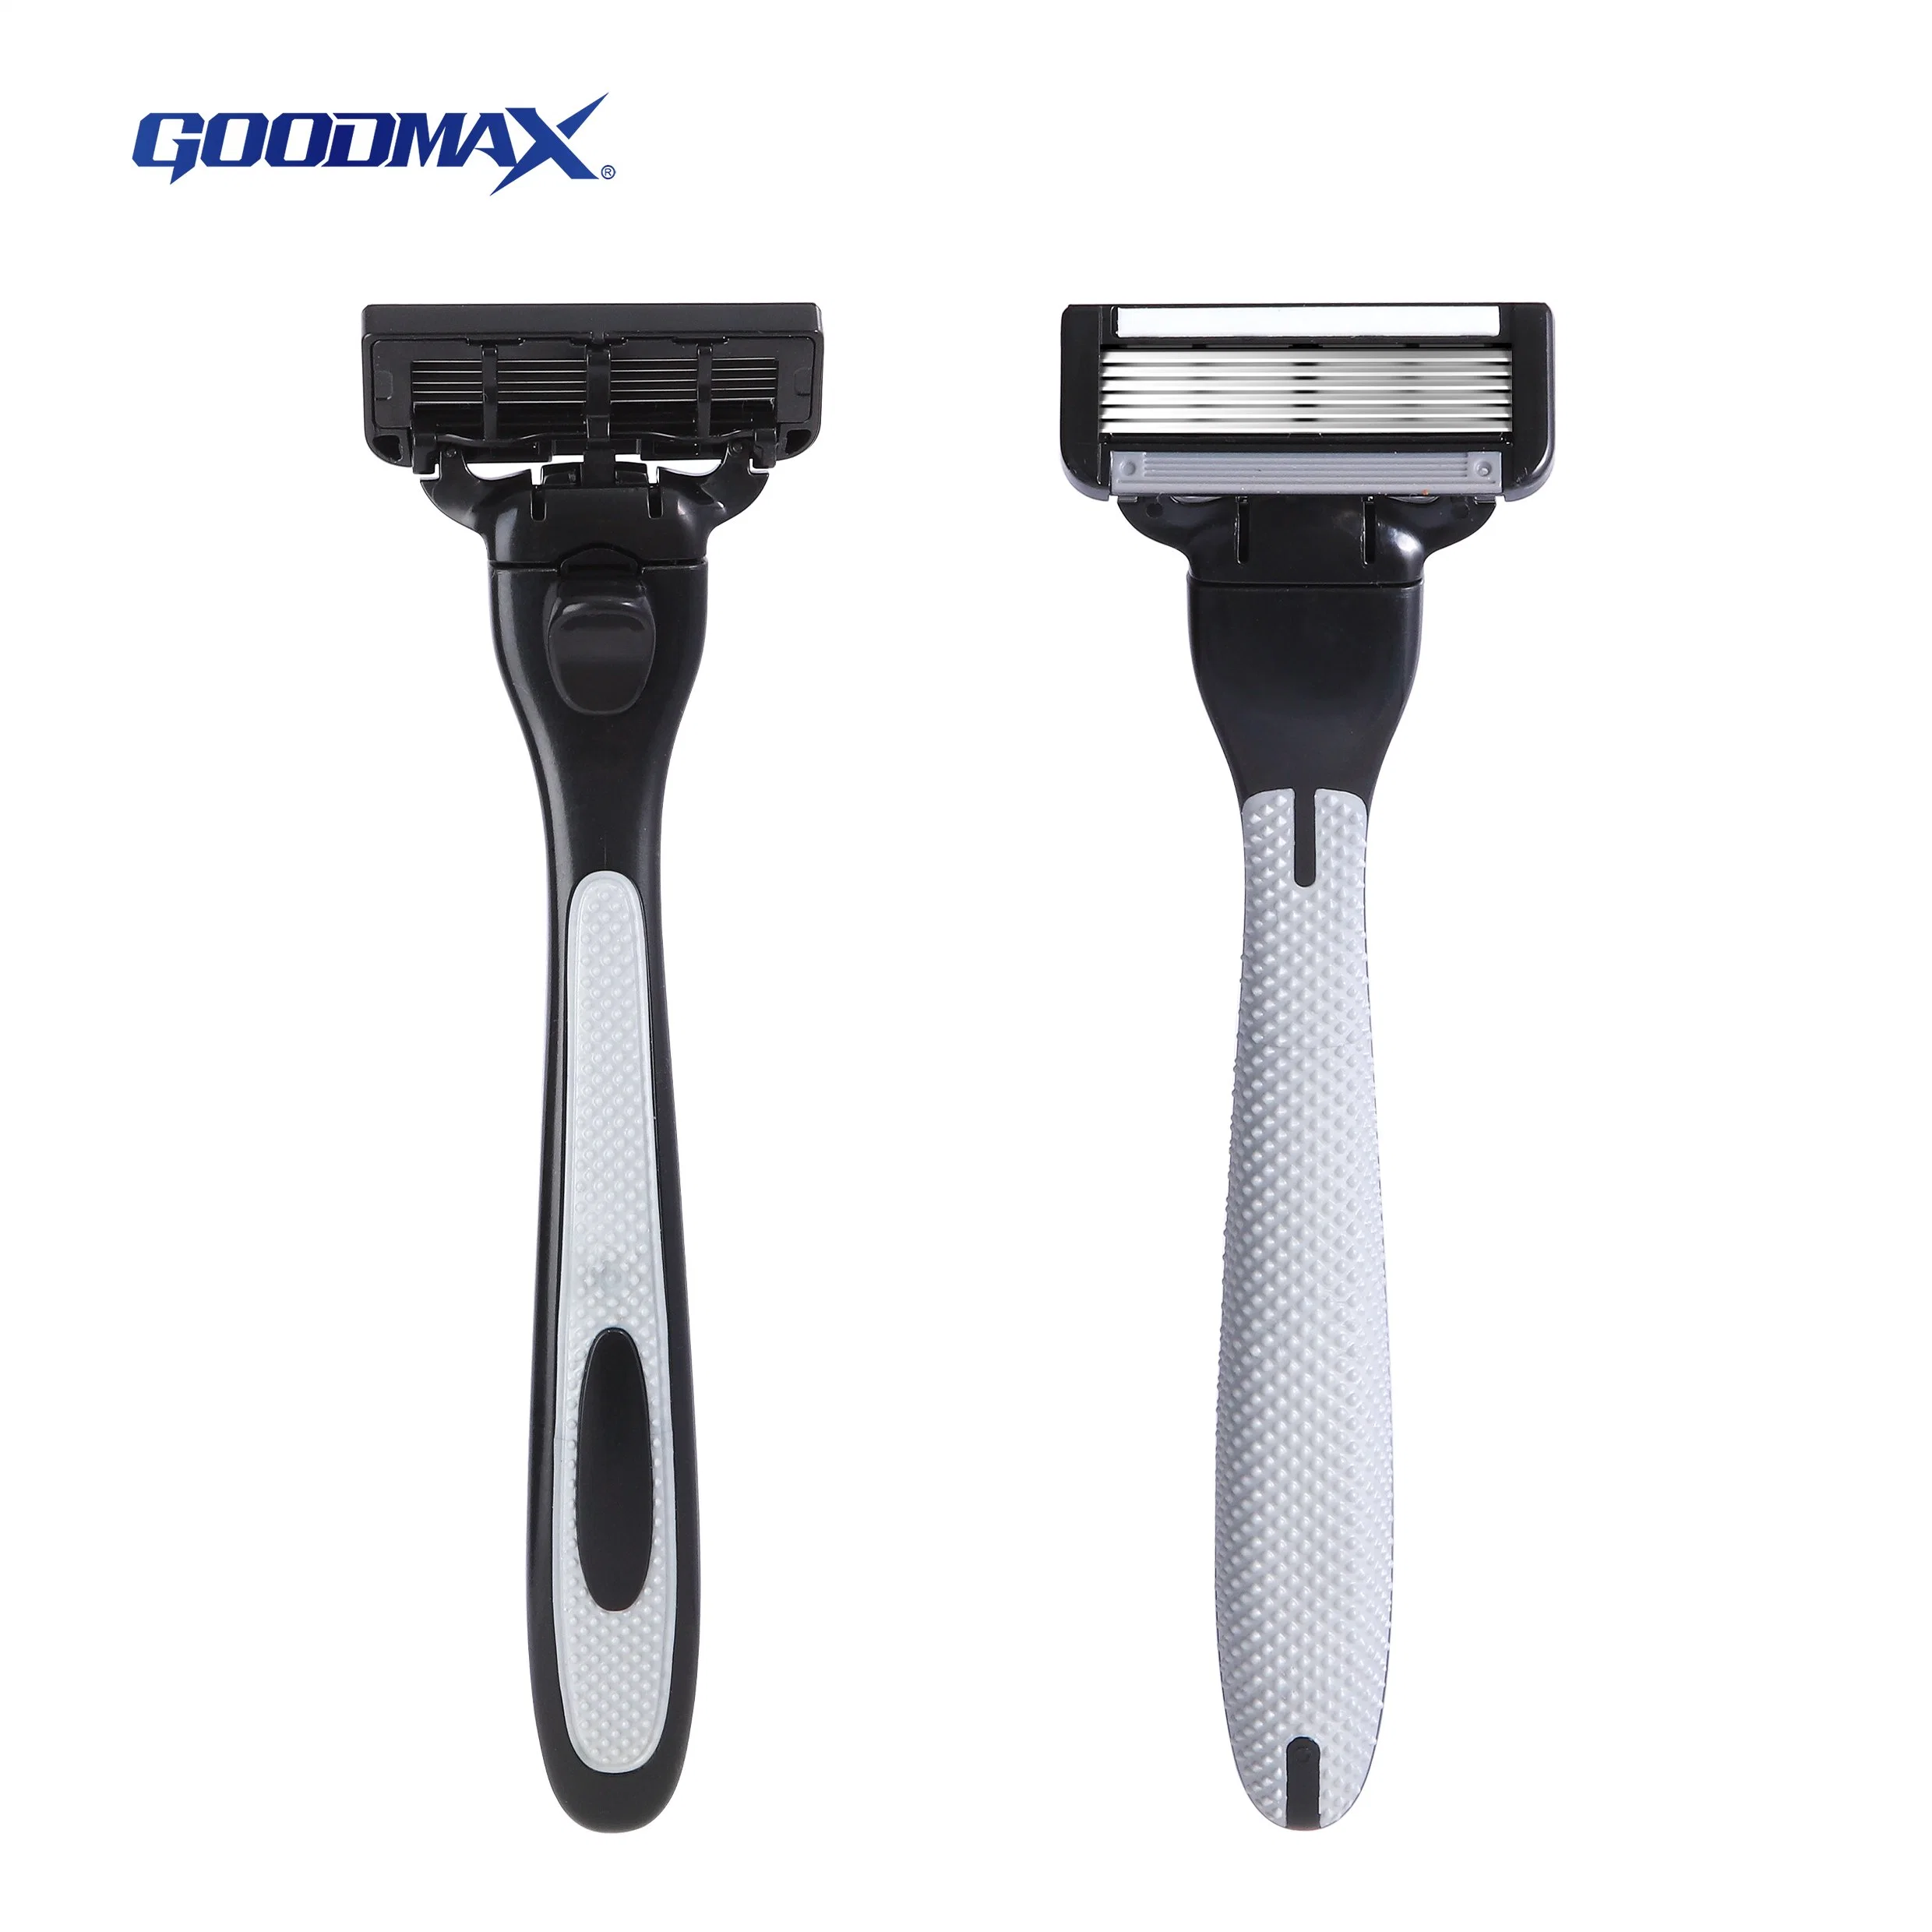 Four Blade System Blade Razor with Washable Cartridges